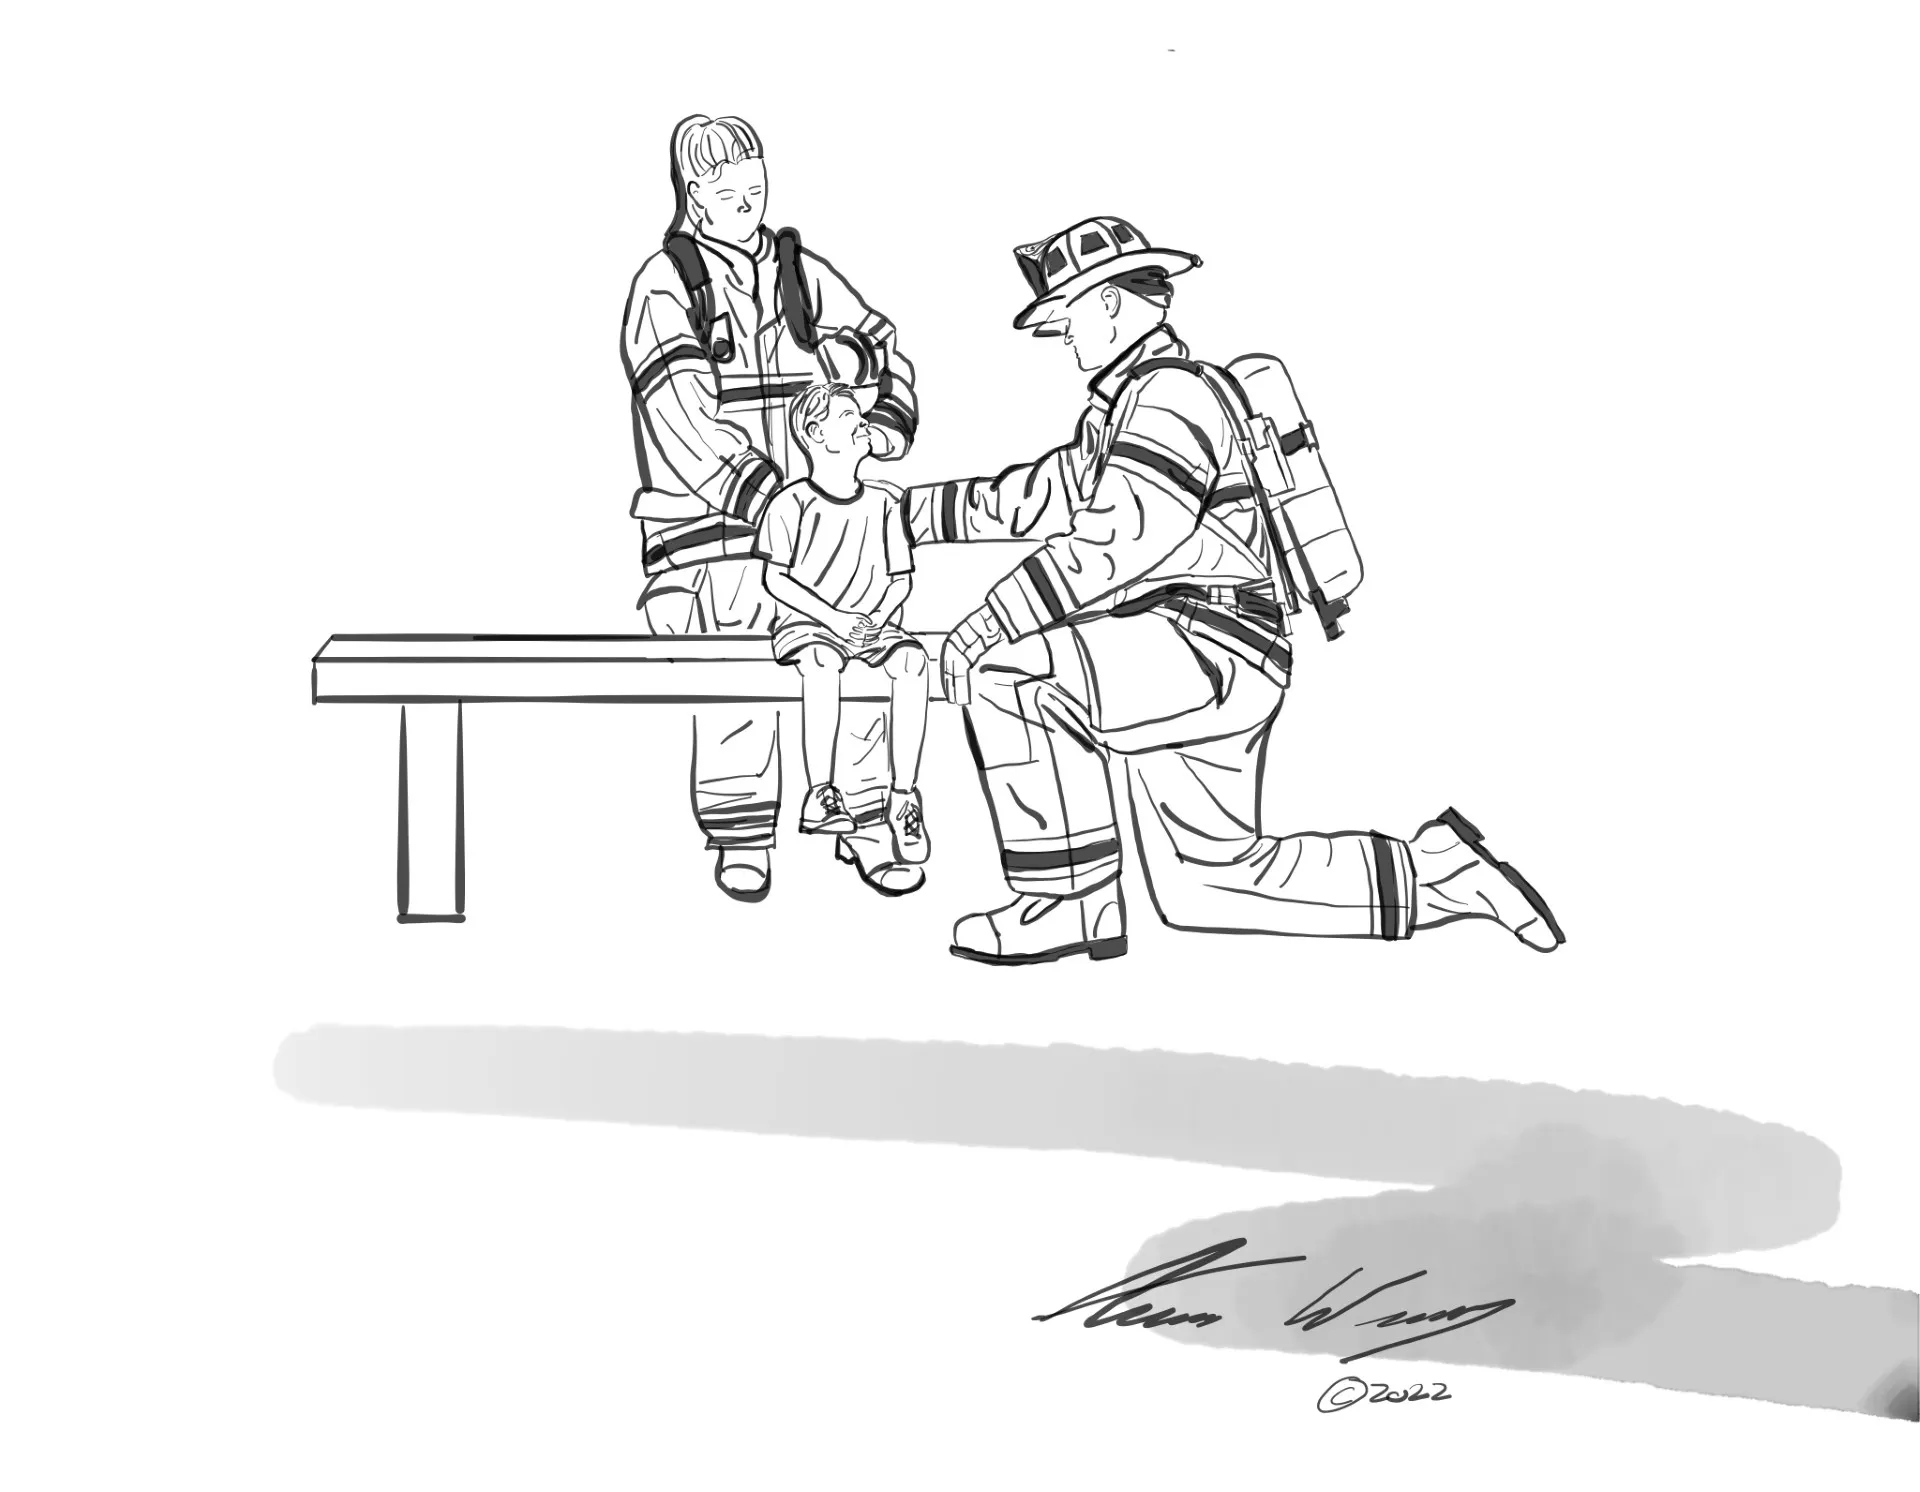 drawing showing a seated child and male and female firefighters comforting him